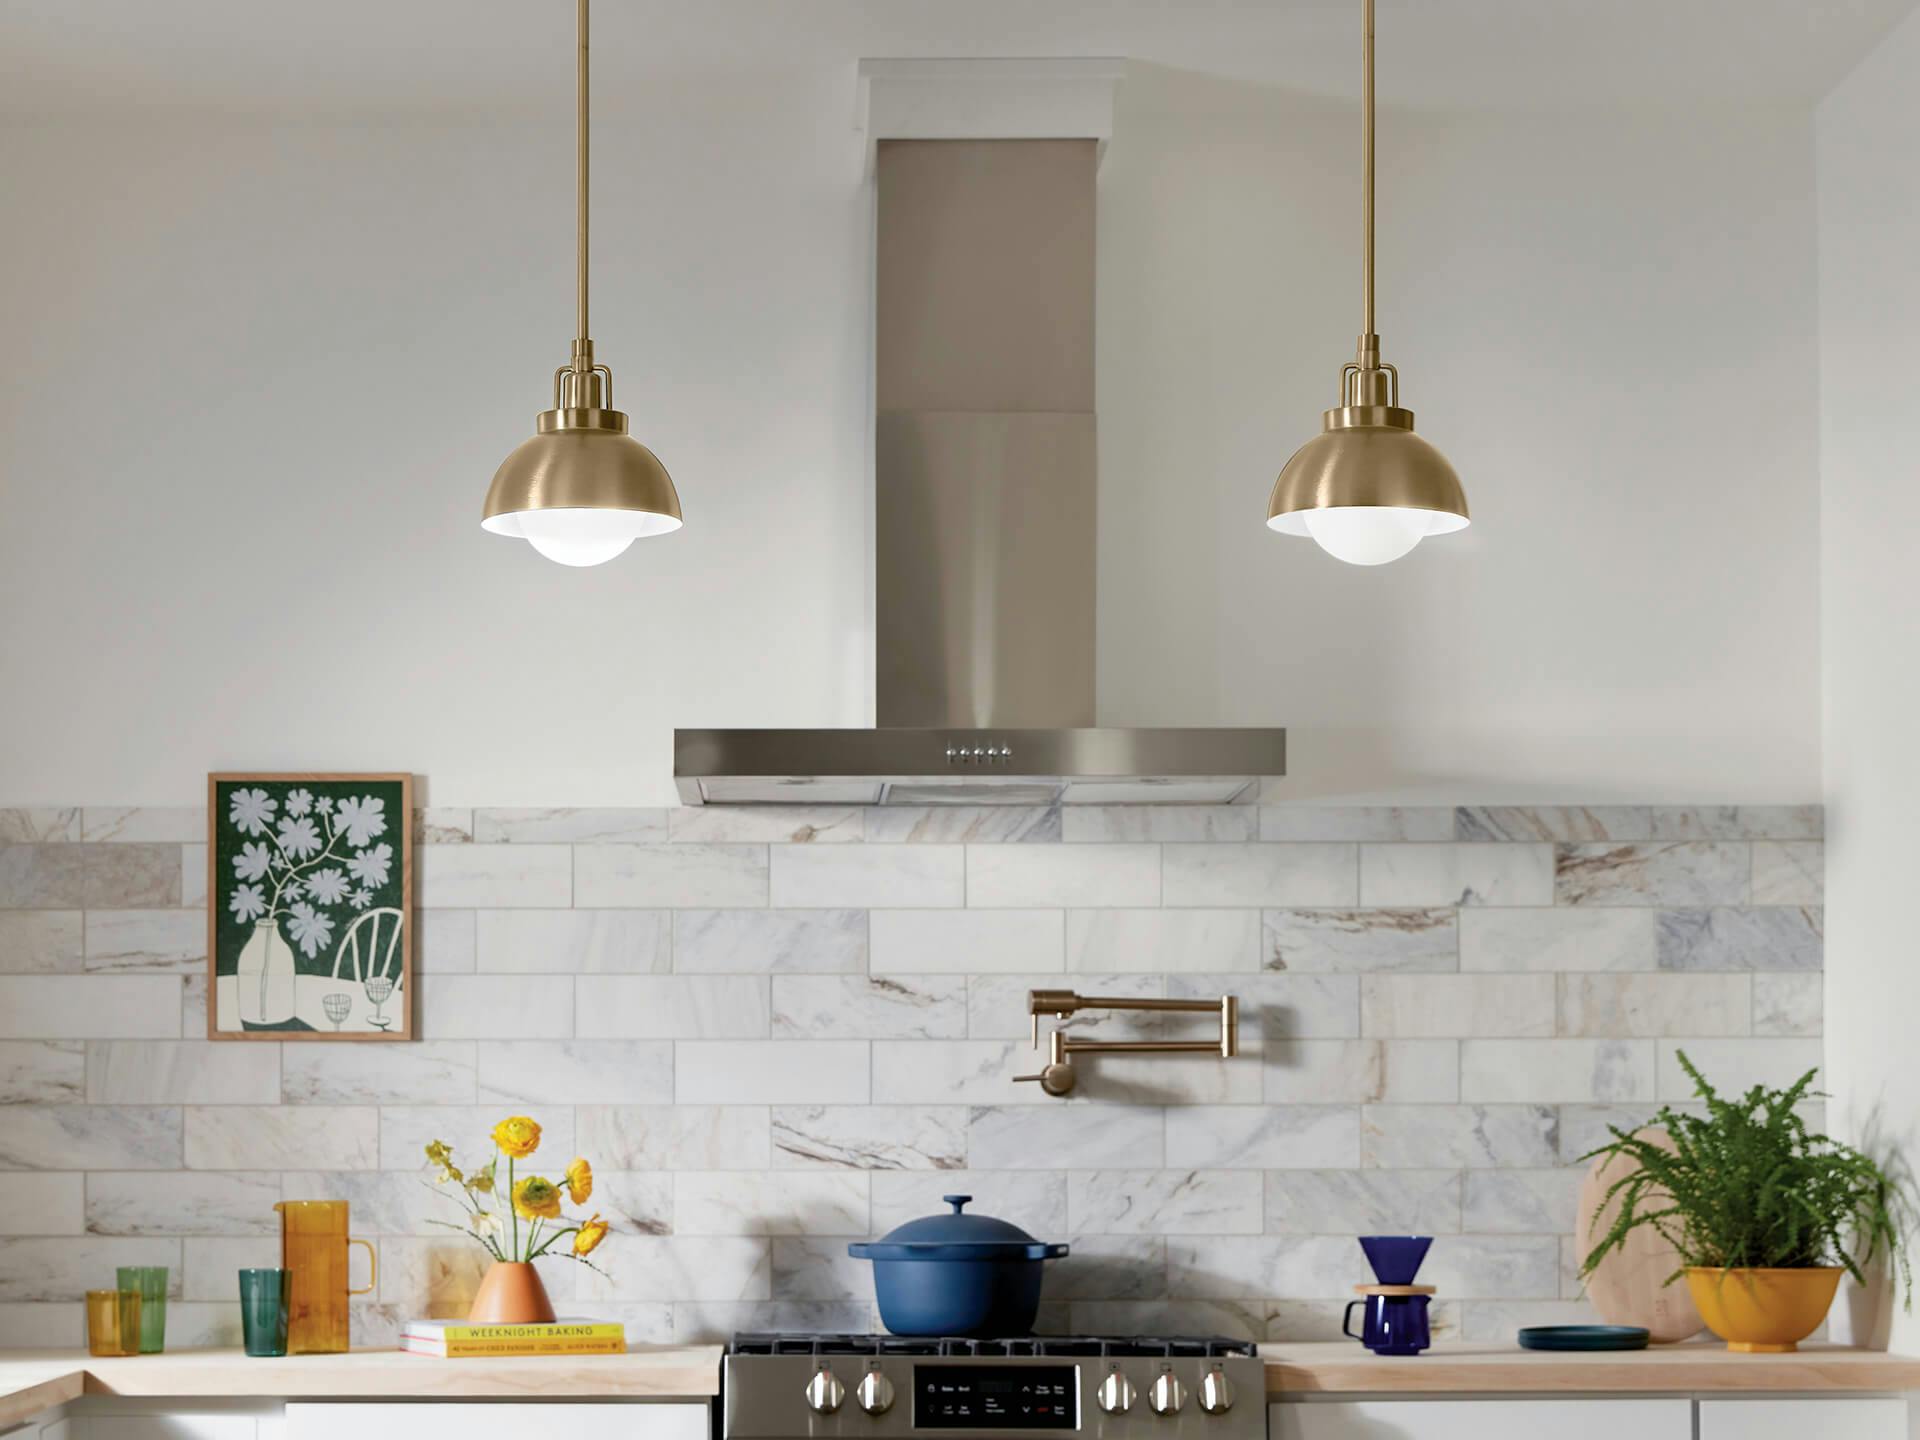 Kitchen featuring two Niva pendants in champagne bronze hangings on each side of the stove